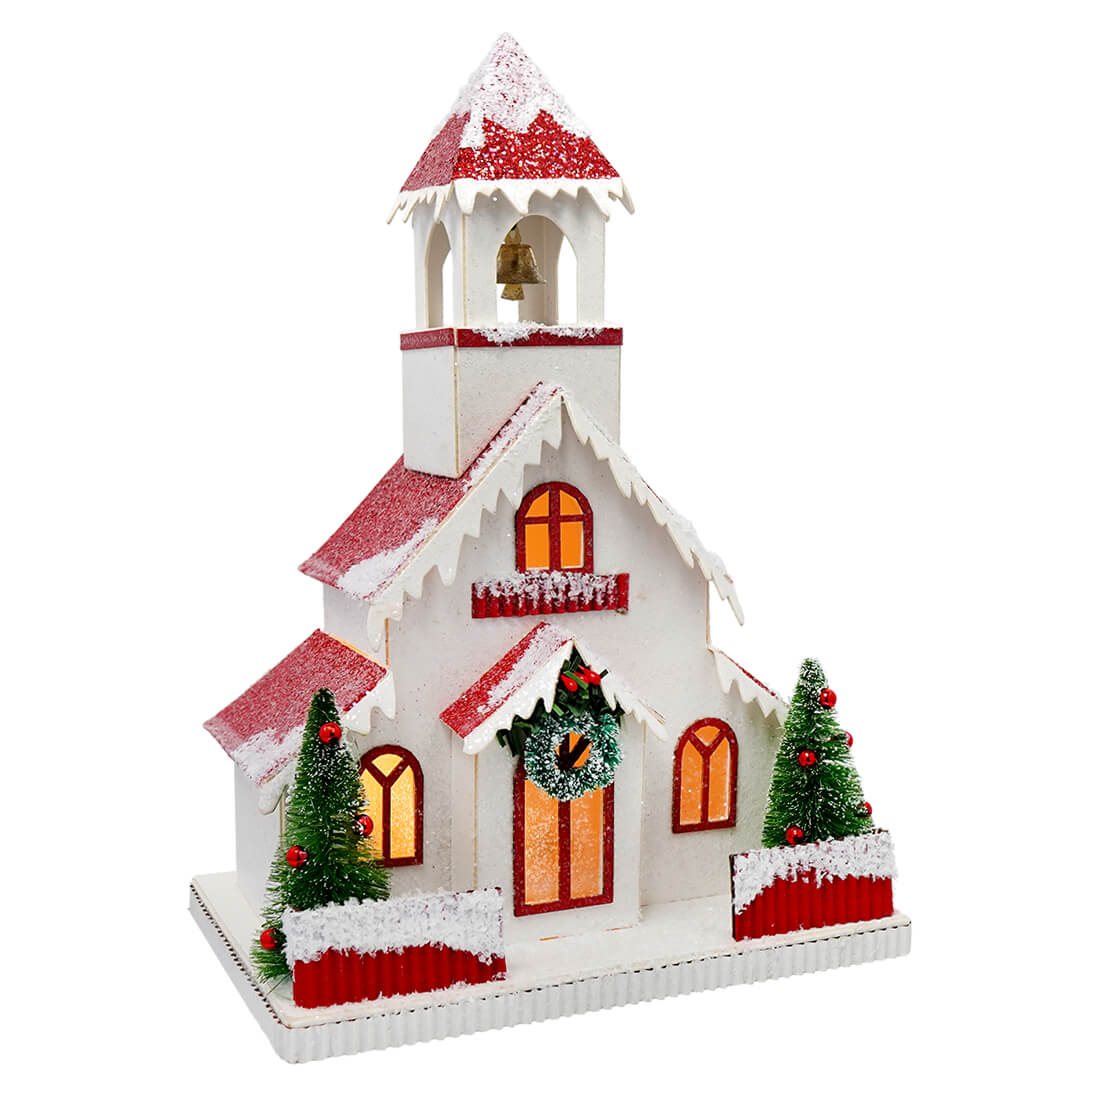 Snowy Glittered Red & White Lighted Chapel Church